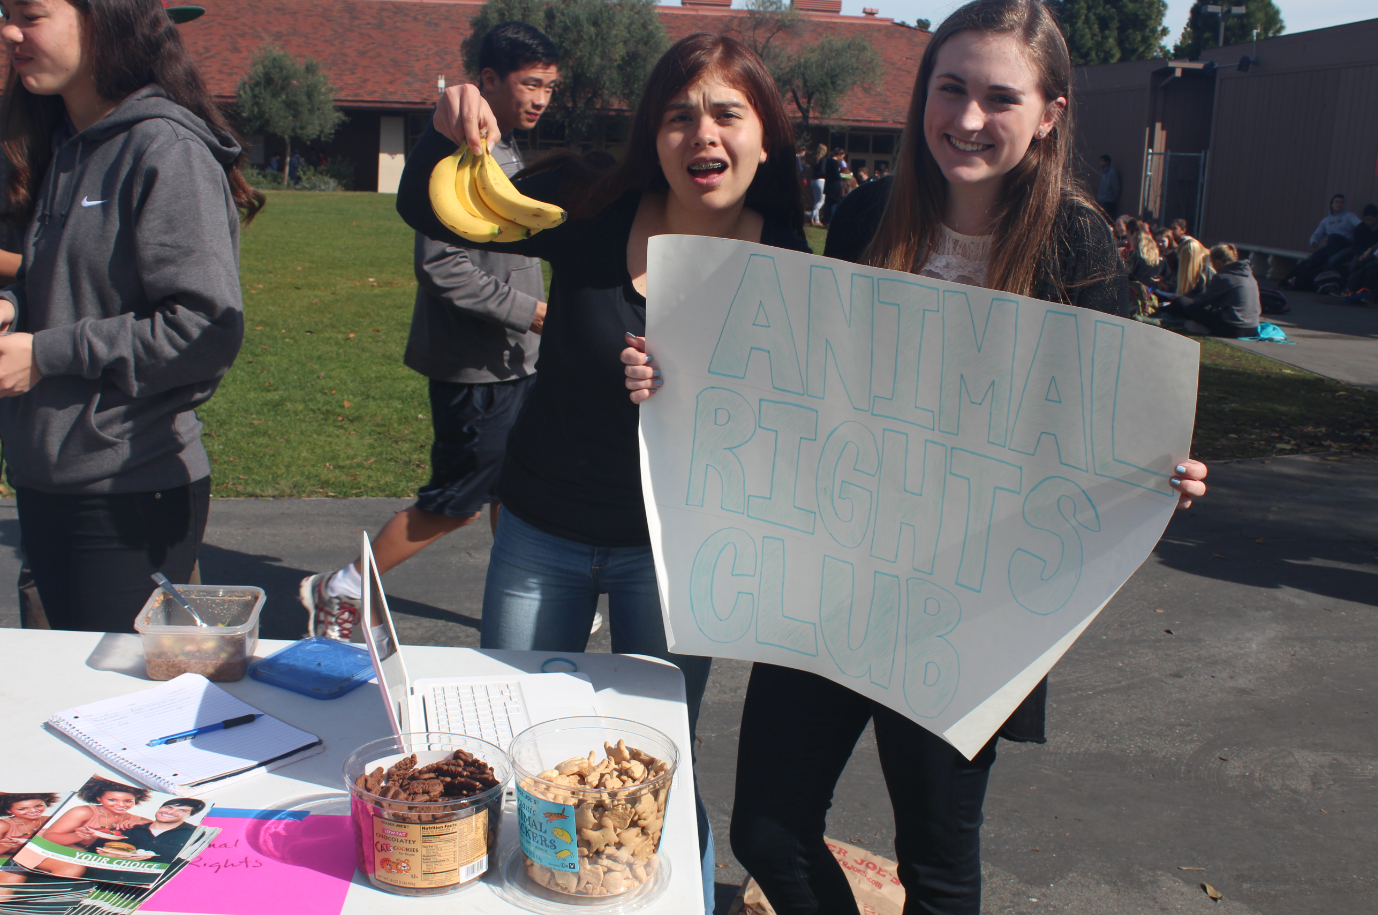 Junior club founders Chelsea McIntosh and Danielle Bisbee advertise for their club, which urges students to stand up against animal cruelty. 